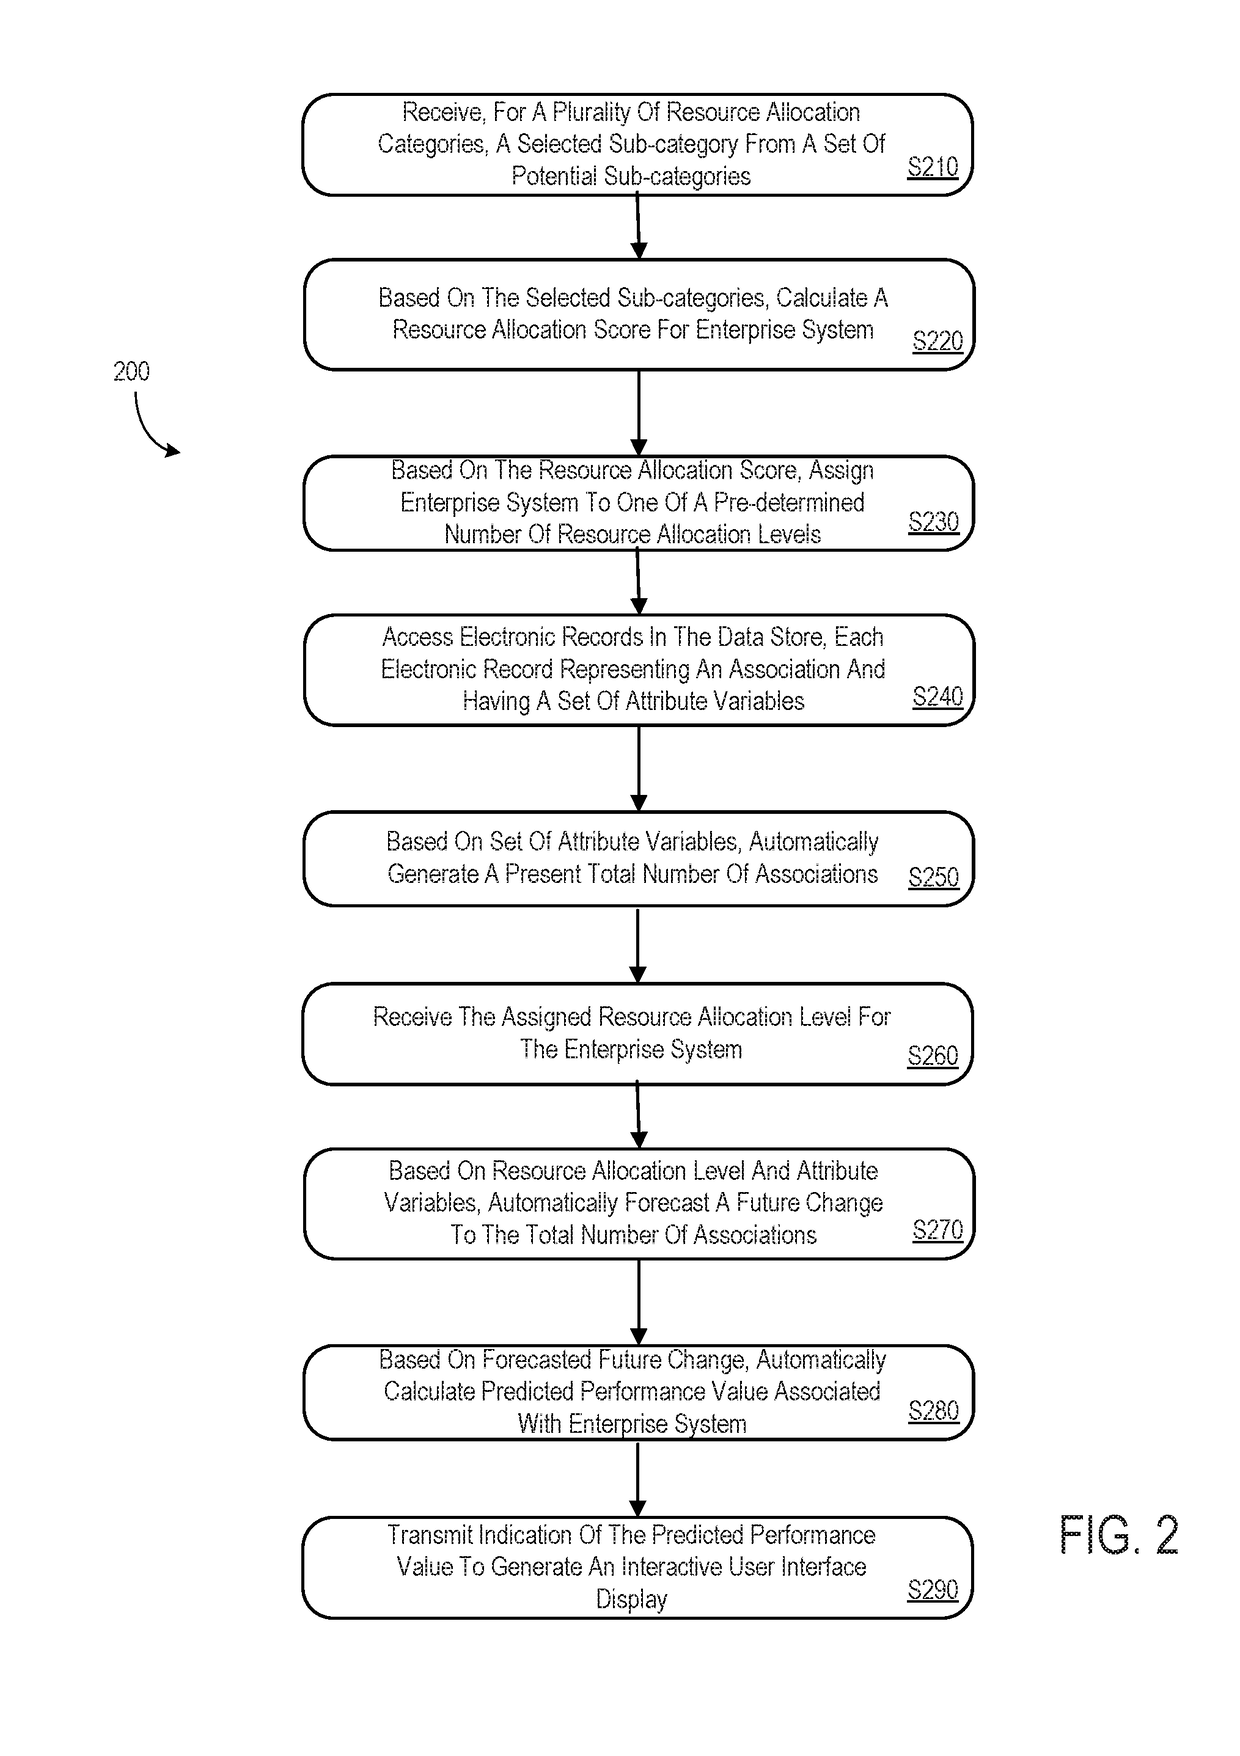 Processing system to predict performance value based on assigned resource allocation